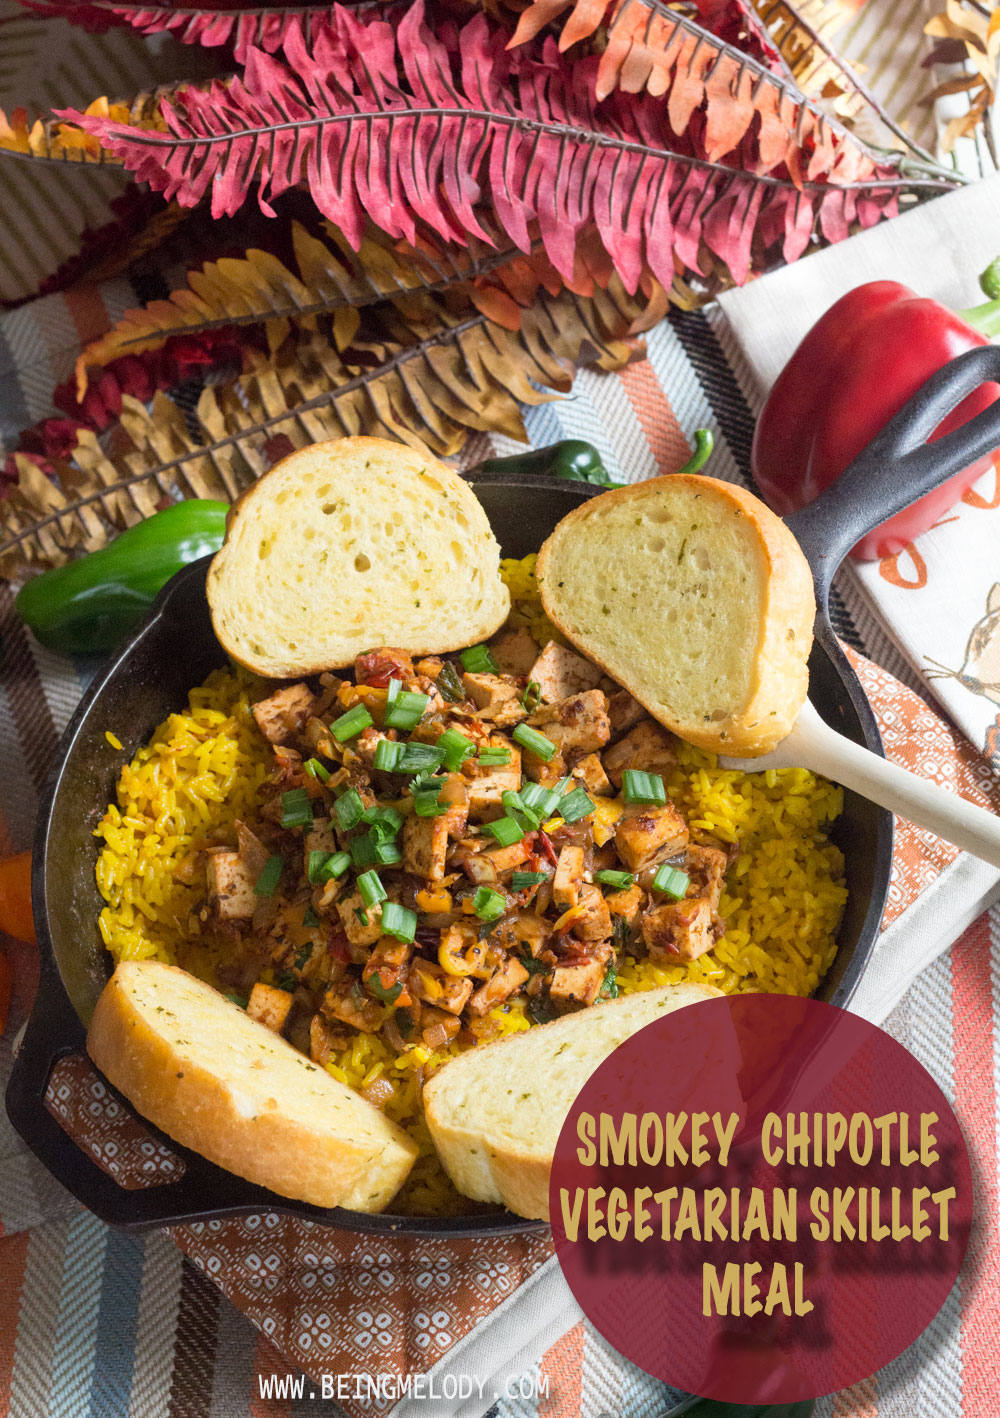 Looking for a quick weekday meal? Try this Smokey Chipotle Vegetarian Skillet! |BeingMelody.com| @BeingMelody